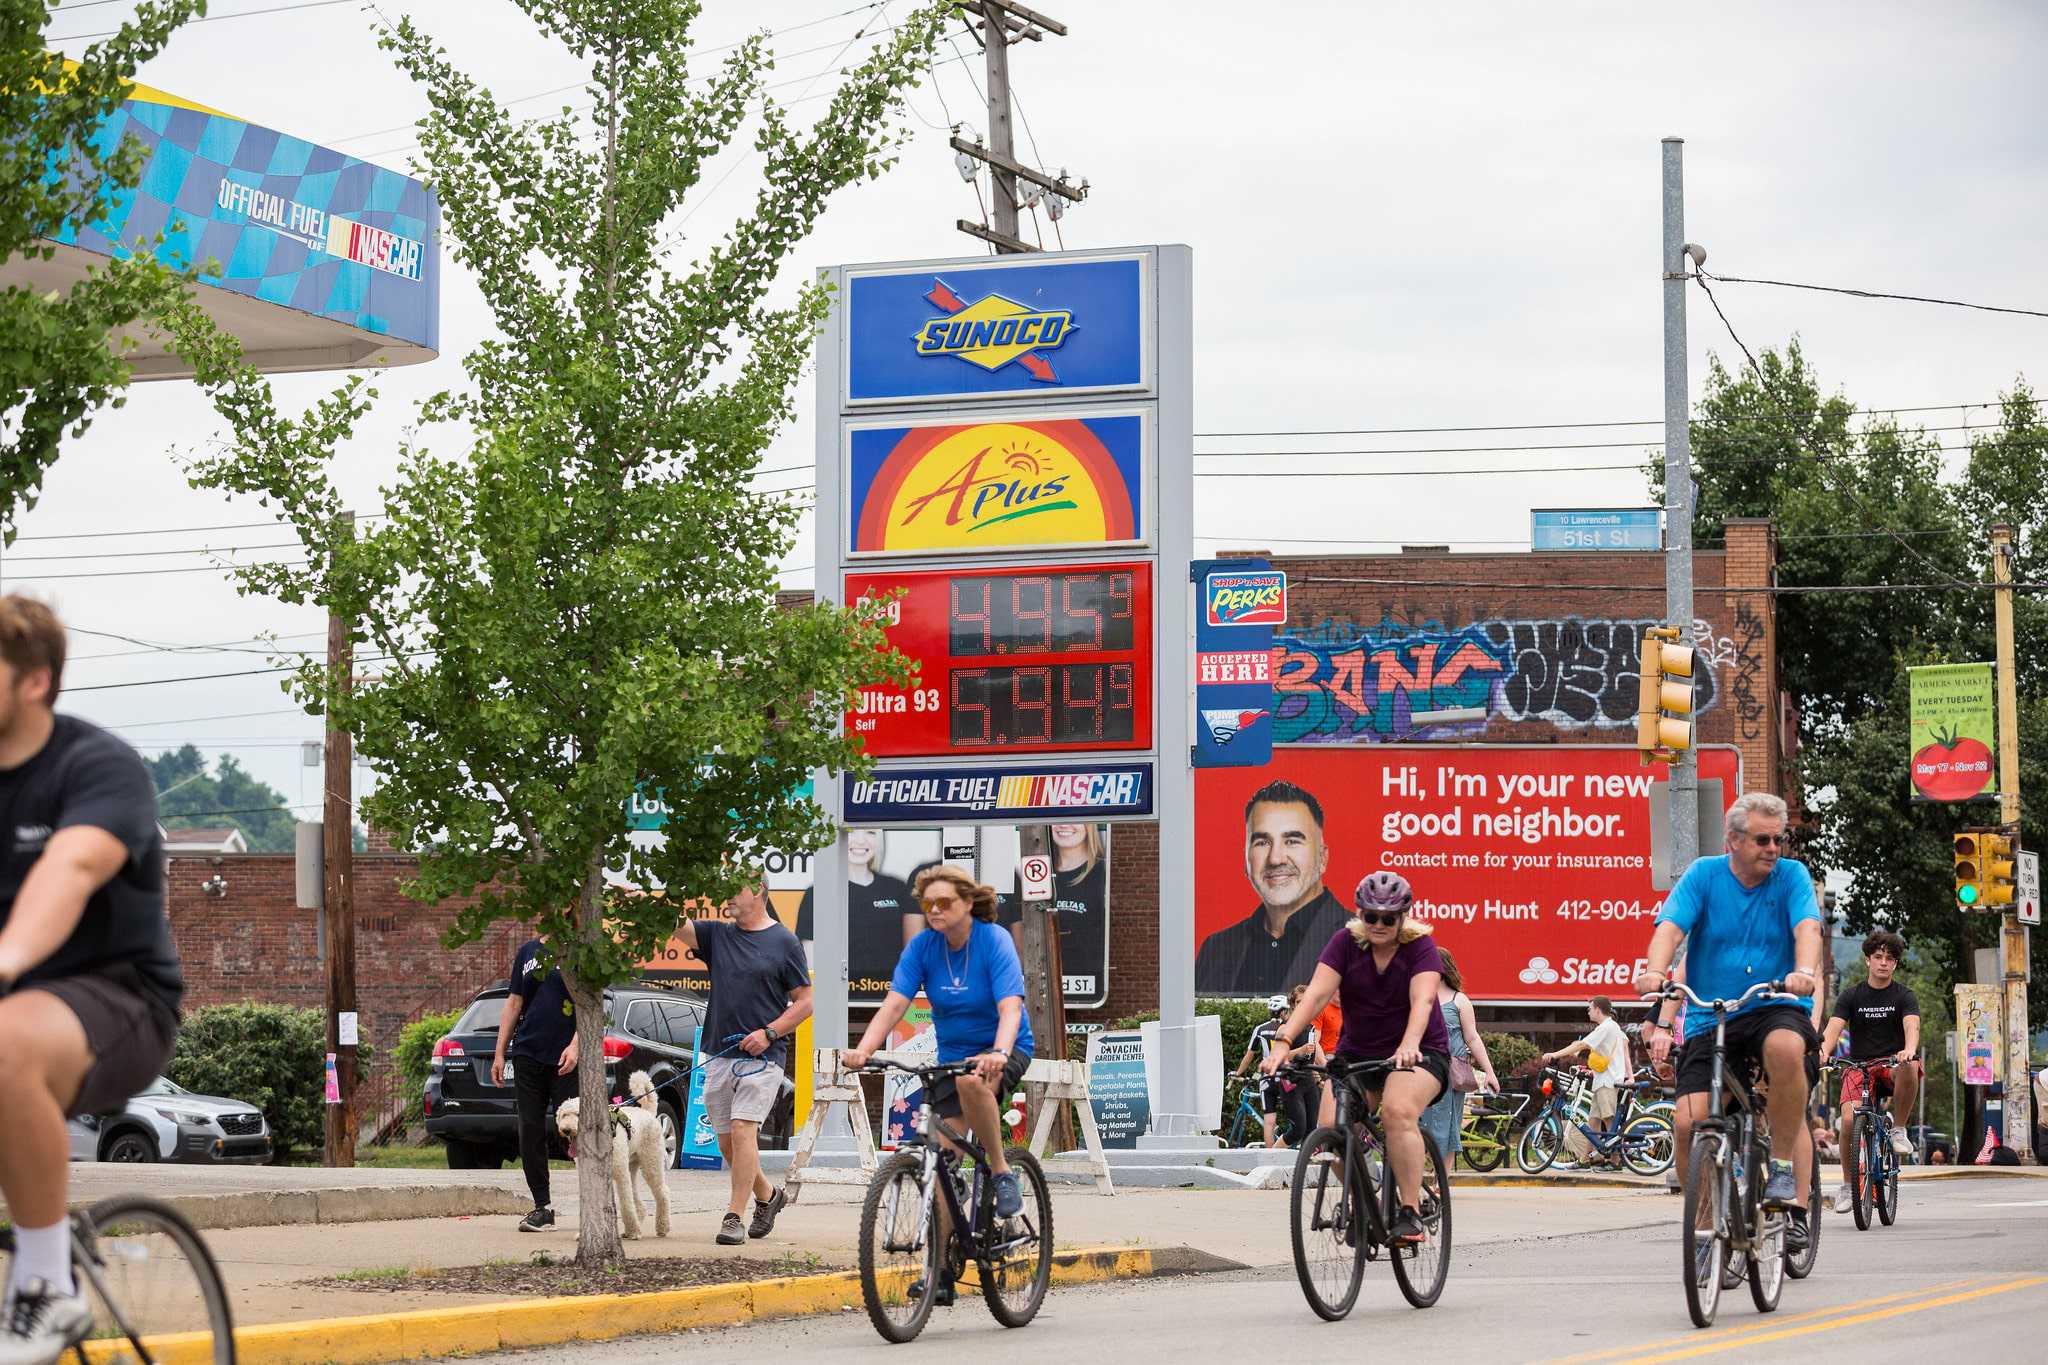 People on bikes ride in front of a Sunoco gas station sign showing $4.95 per gallon prices. 